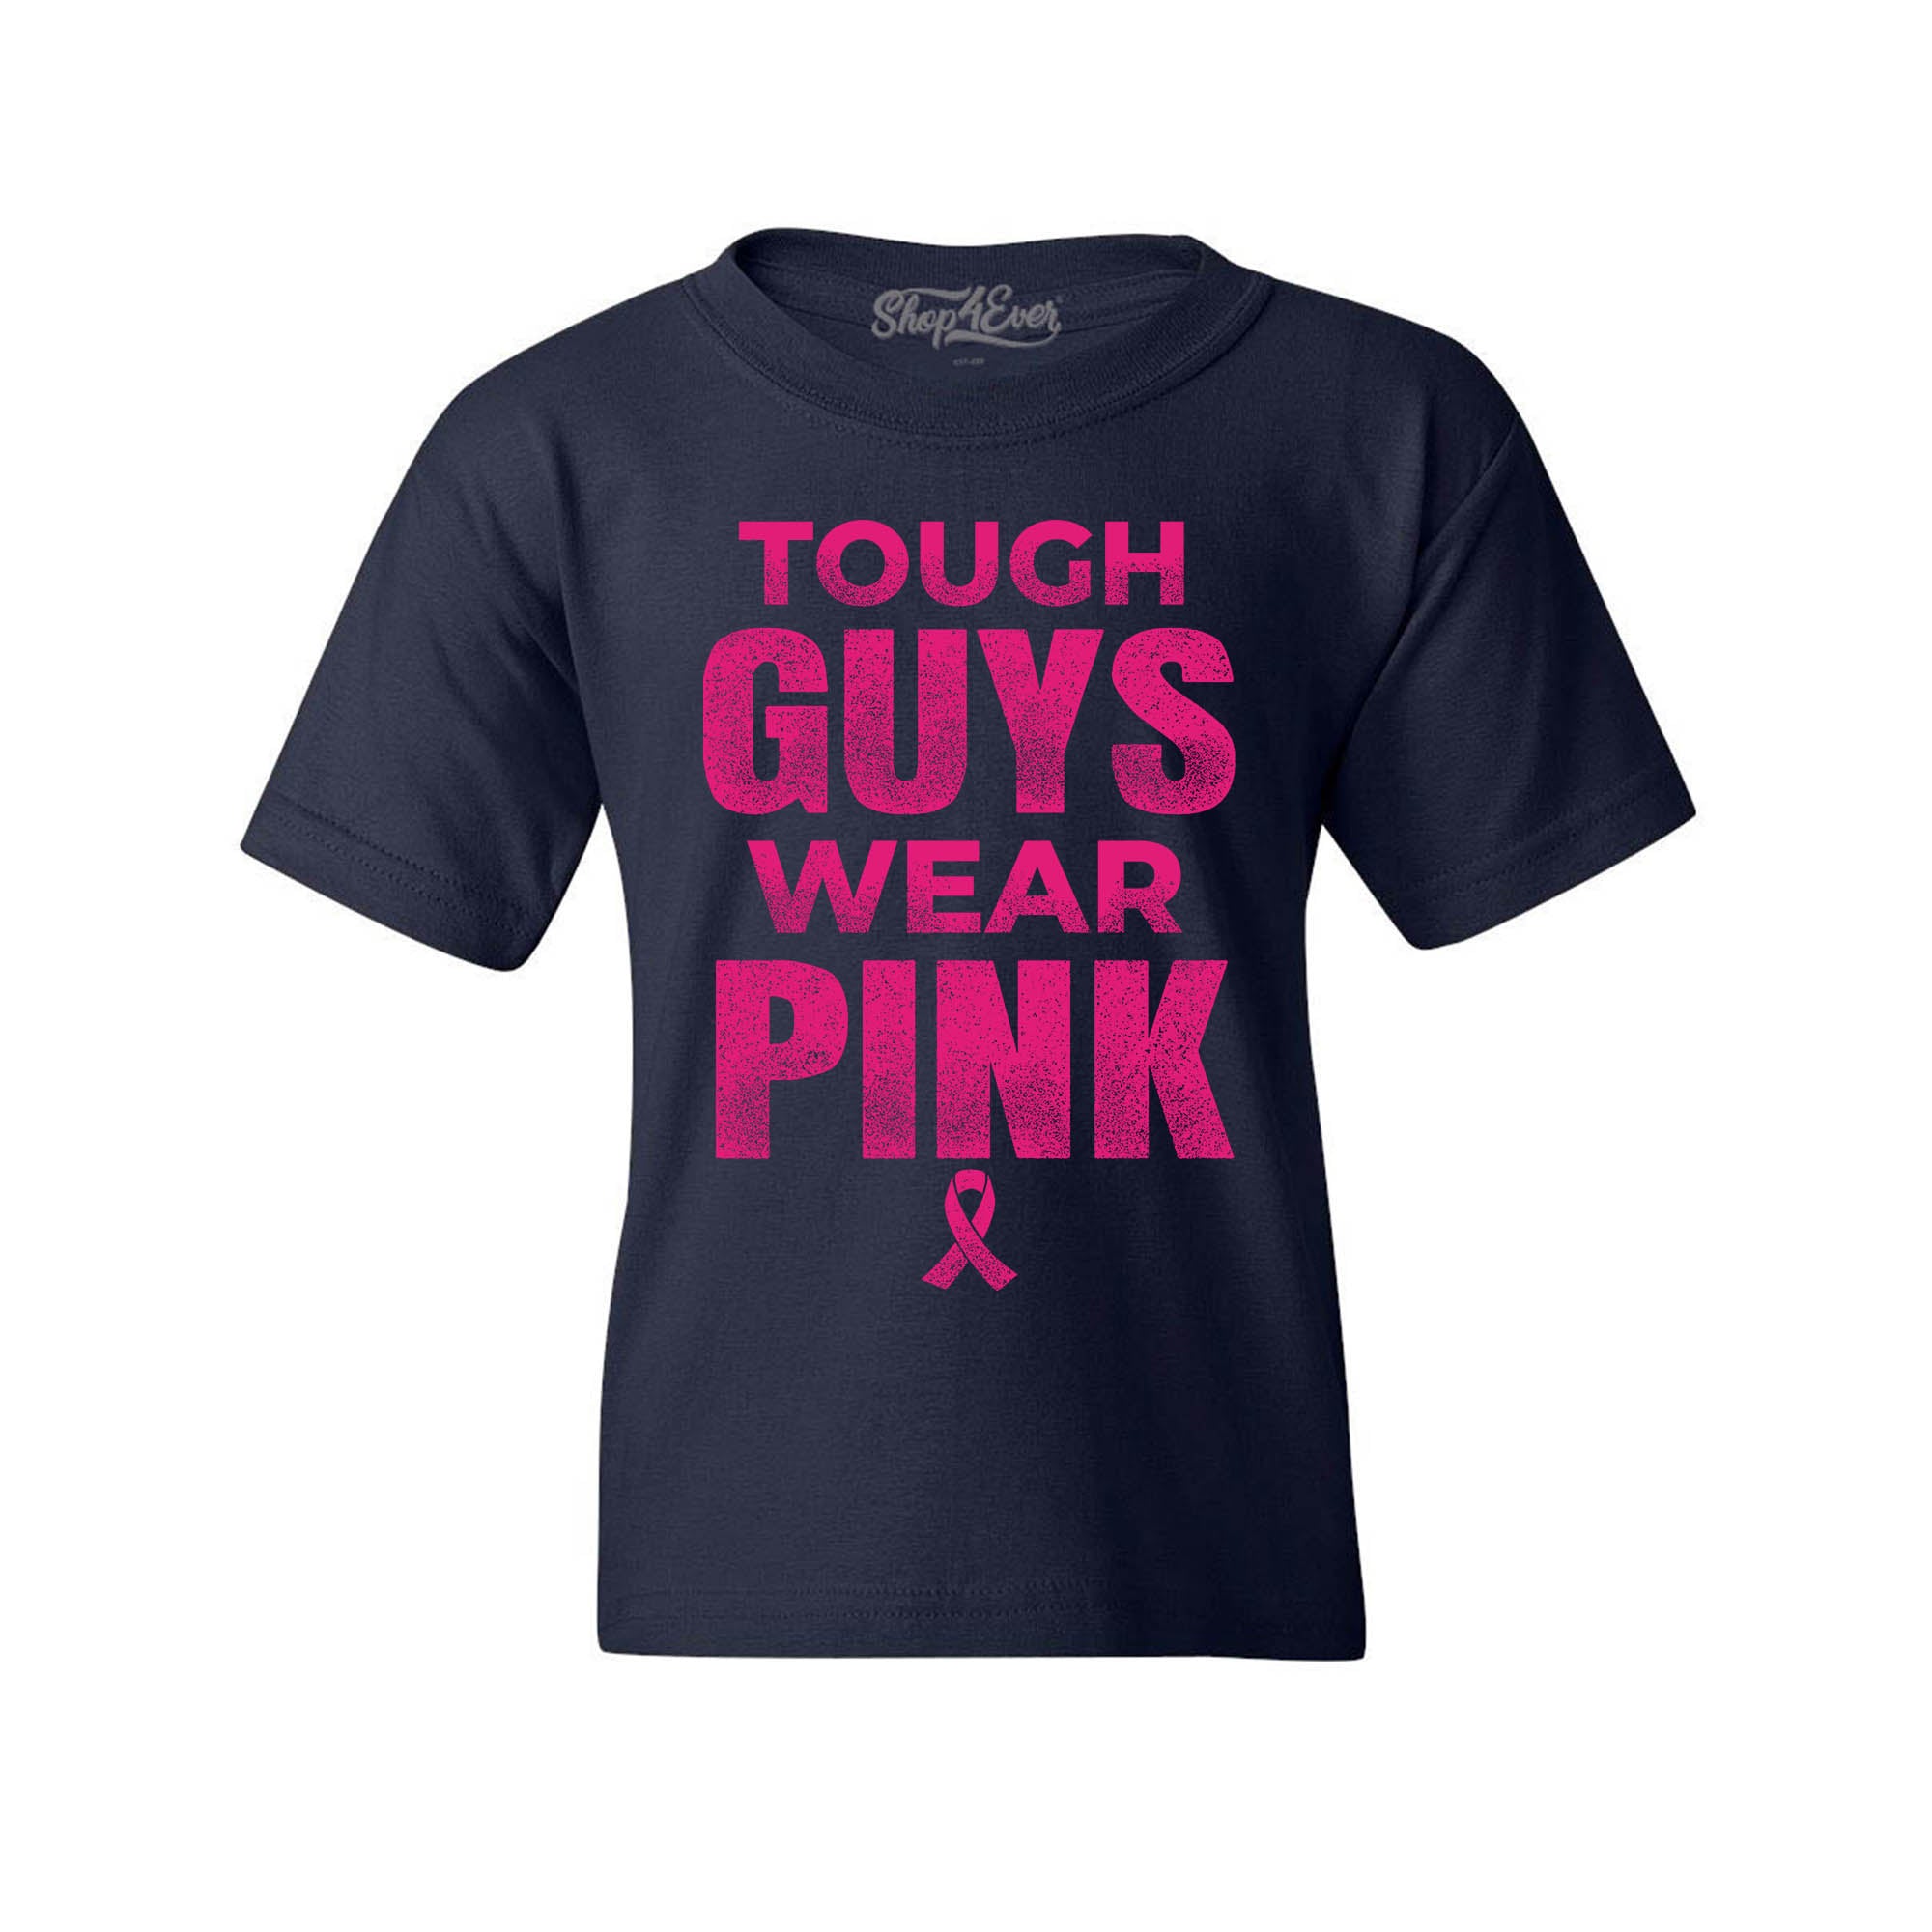 Tough Guys Wear Pink Youth's T-Shirt Breast Cancer Awareness Shirts